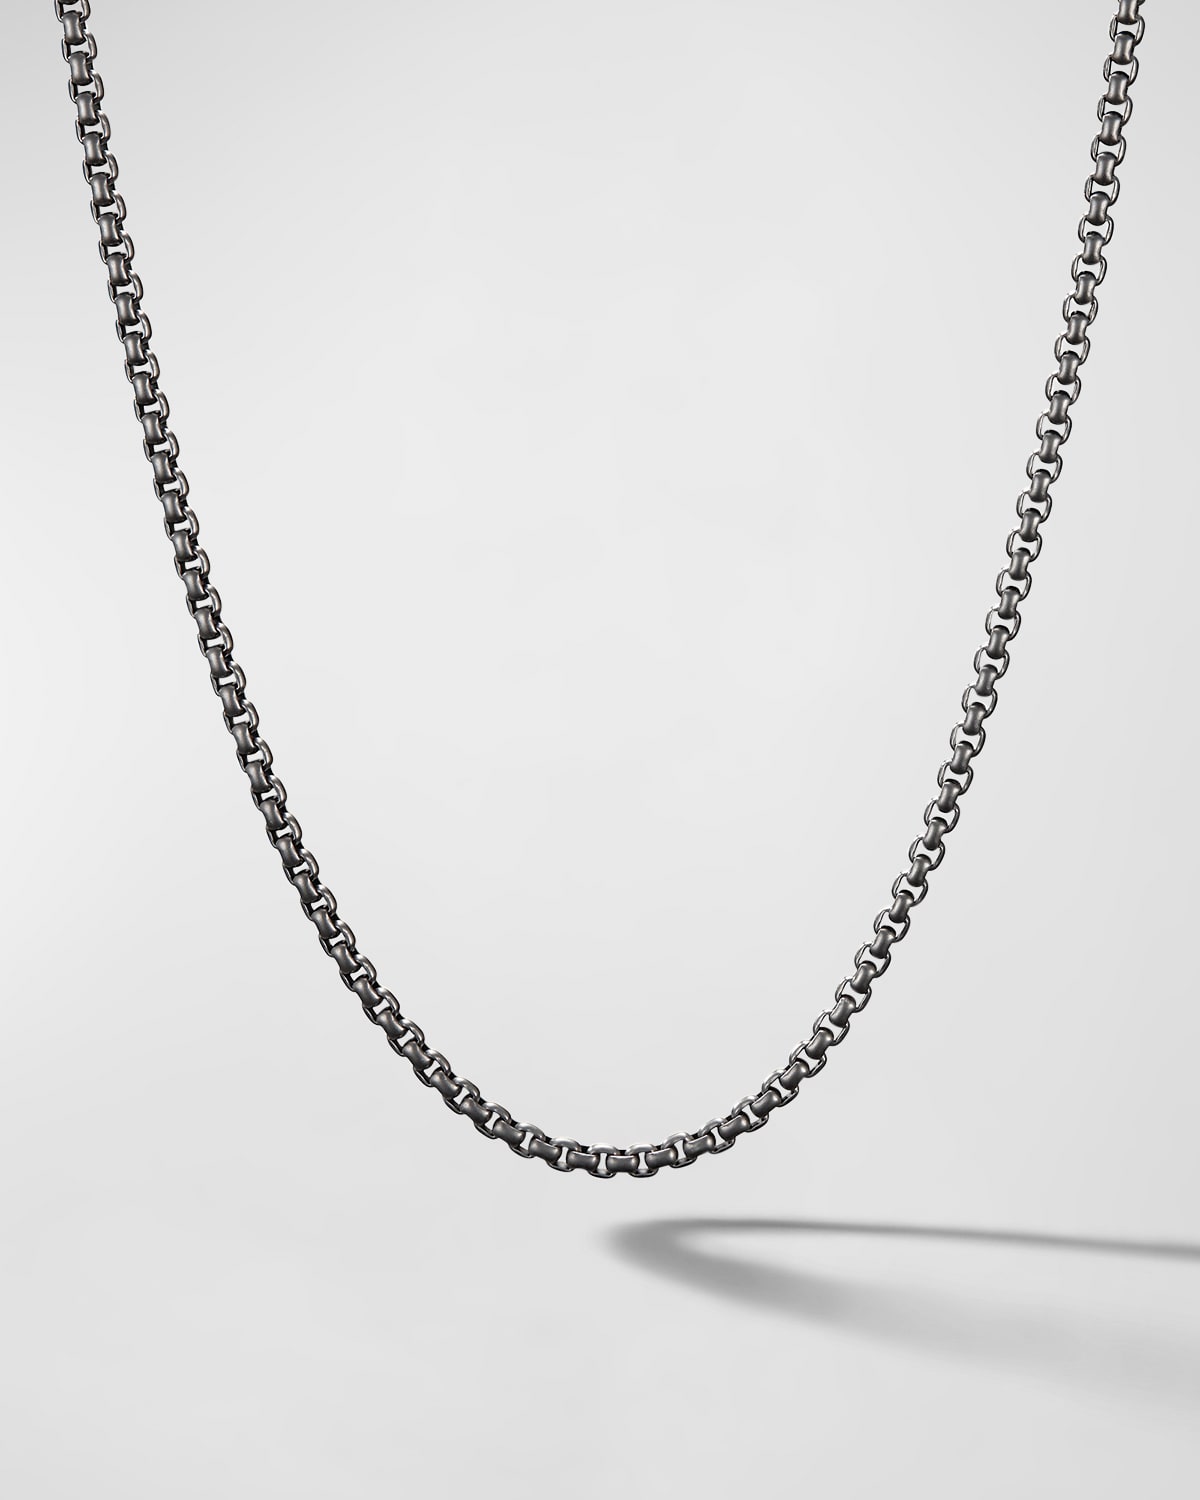 Men's Box Chain Necklace in Darkened Stainless Steel, 2.7mm, 22"L